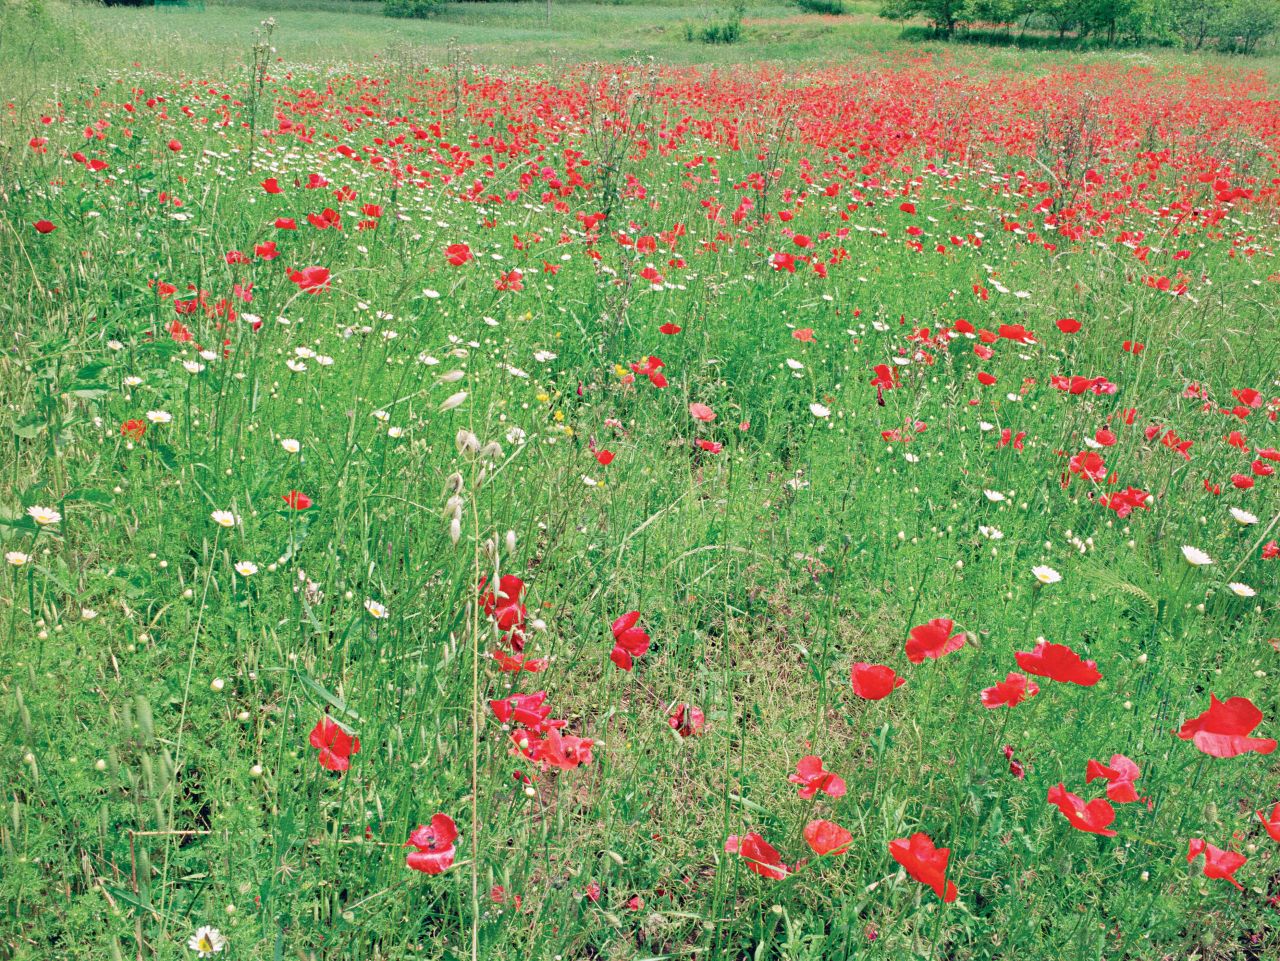 In the summer, meadows are full of colorful wildflowers, including poppies.